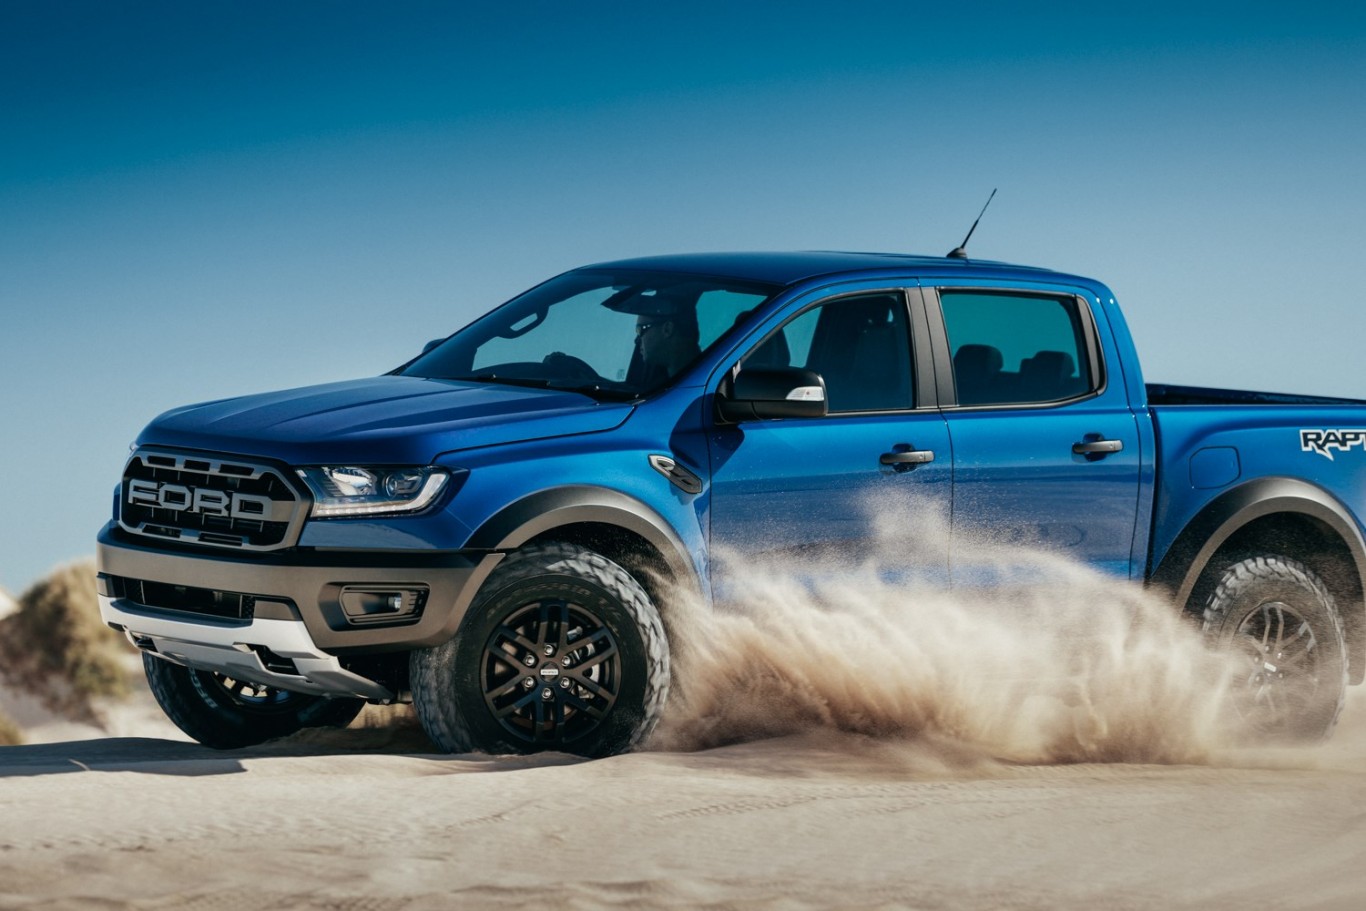 The First-Ever Ford Ranger Raptor